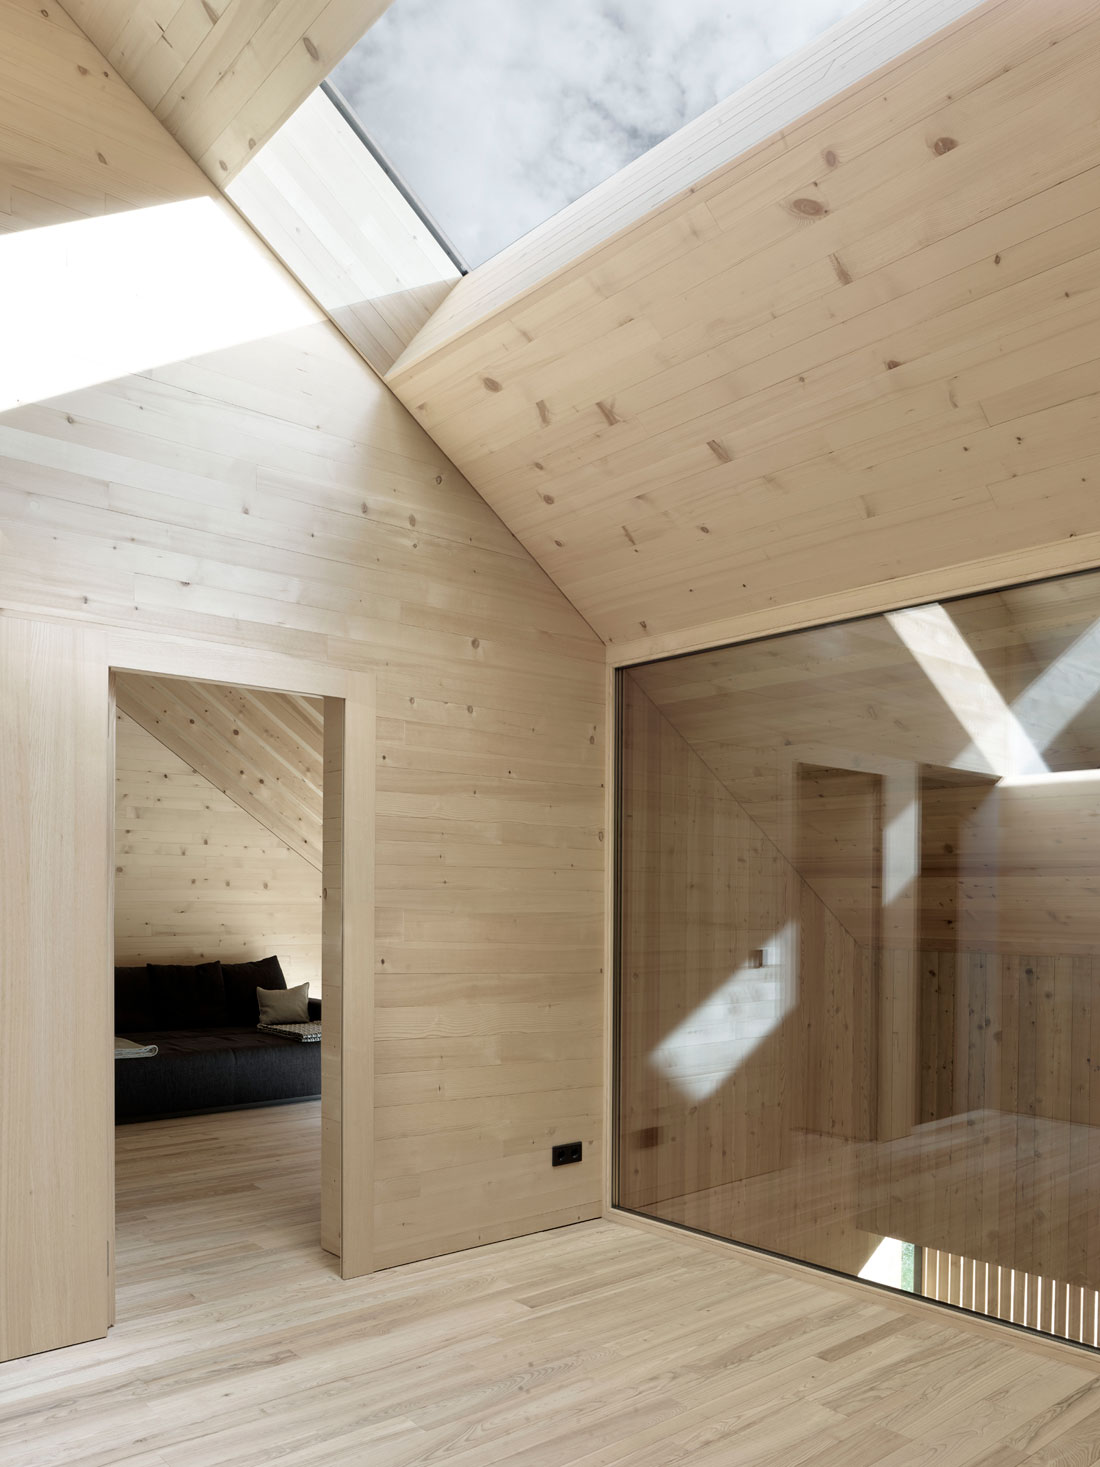 Finished Attic With Skylight by Innauer-Matt Architects